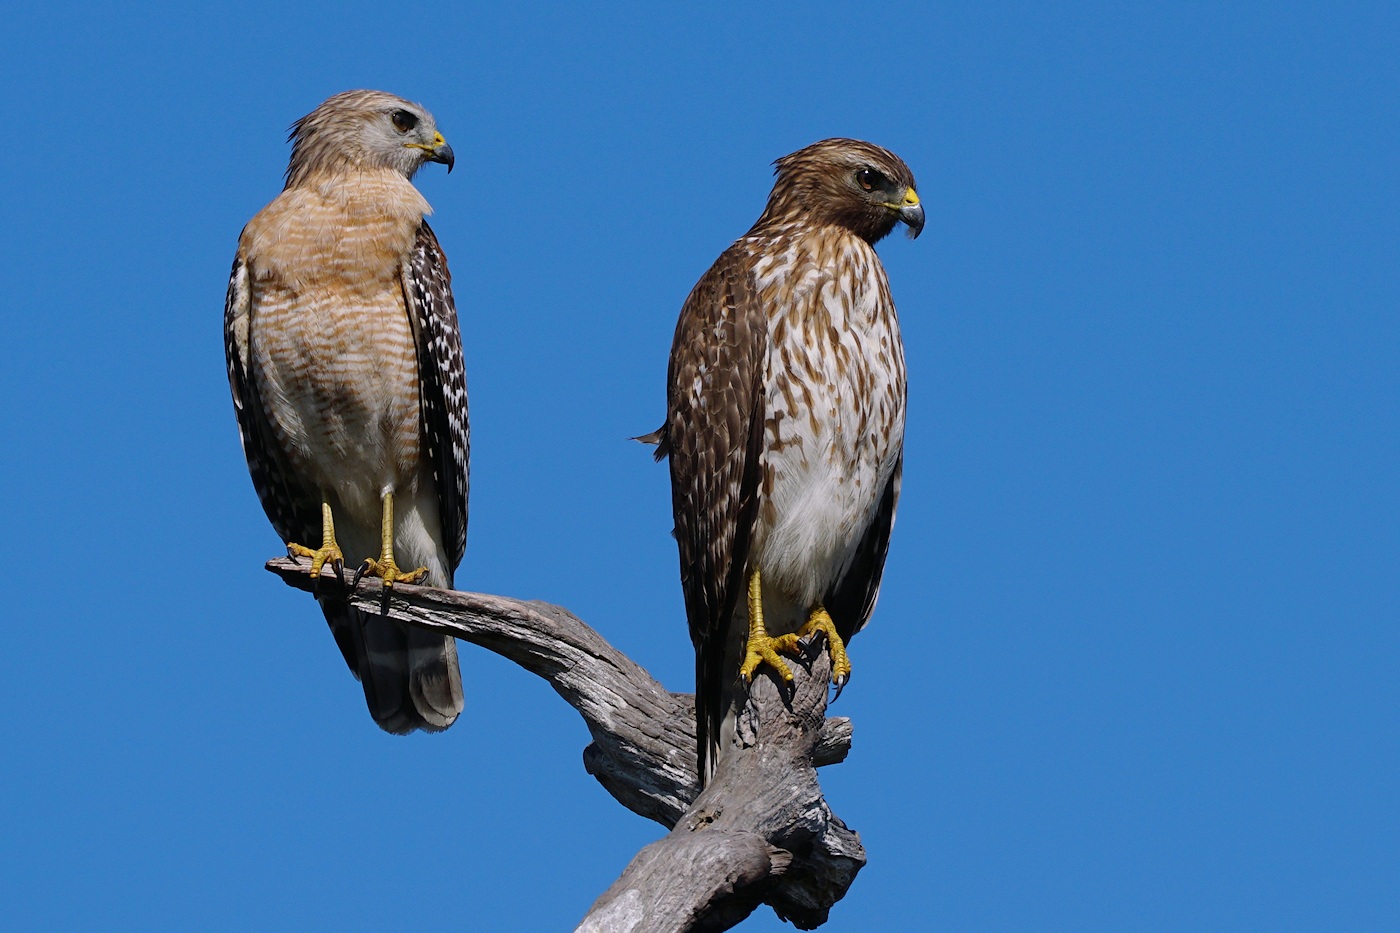 Red-shouldered hawk couple